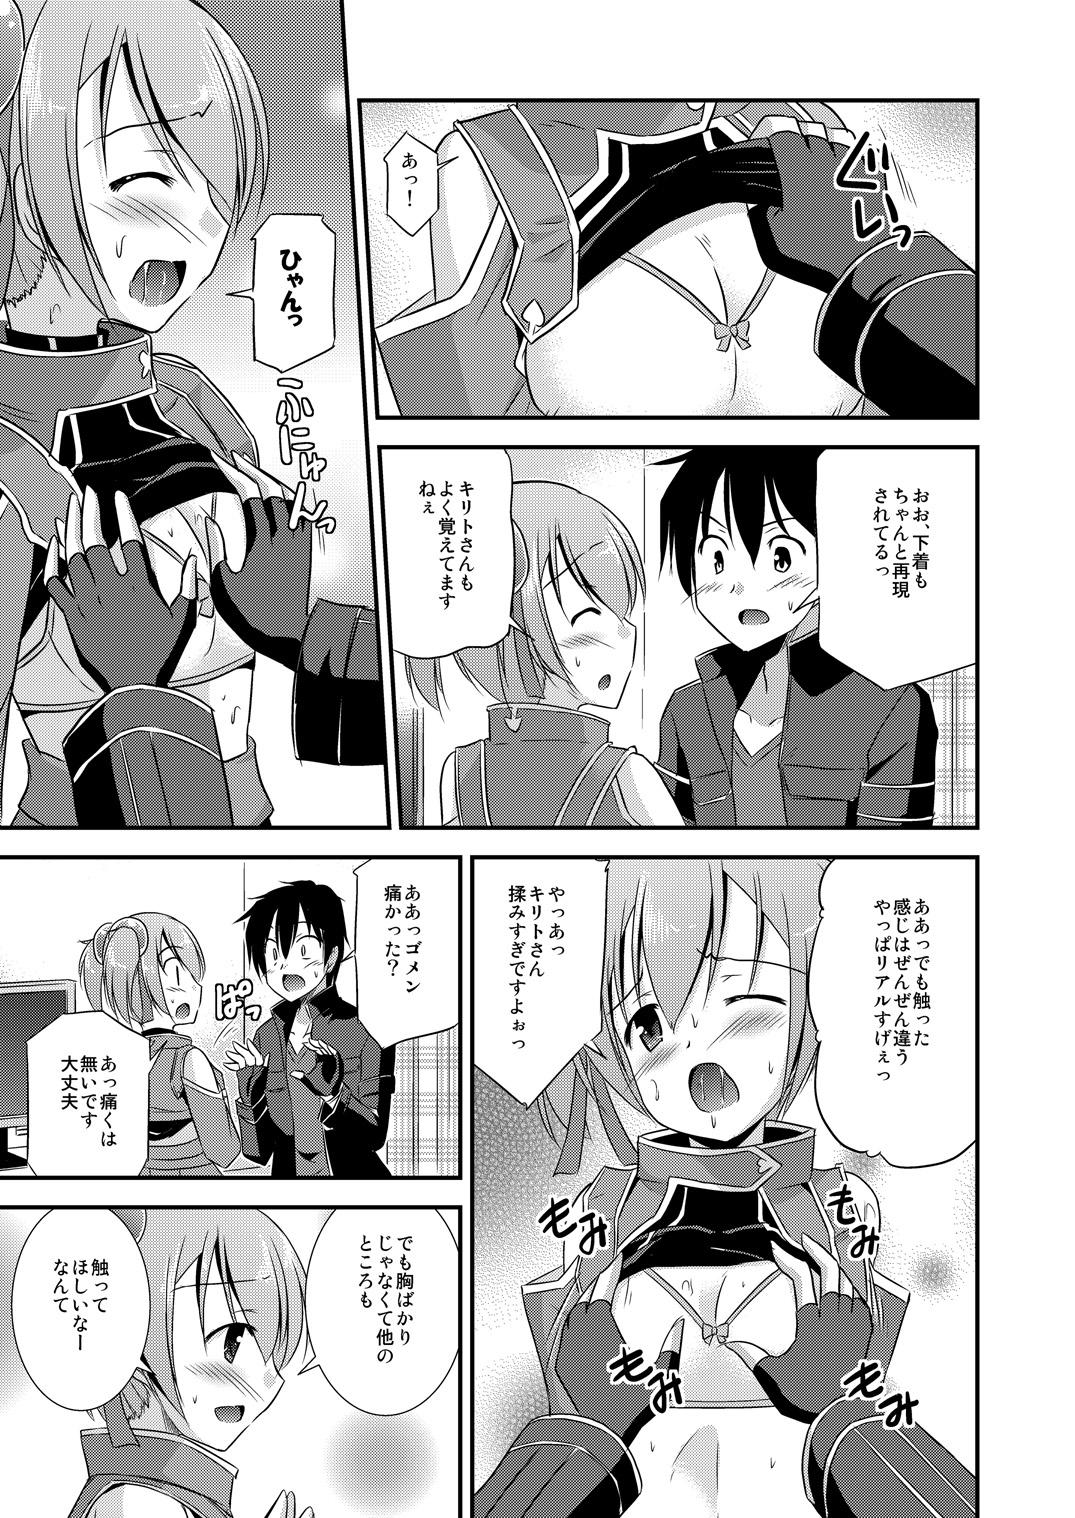 Play Silica Route Offline Phantom Parade After - Sword art online Blonde - Page 10